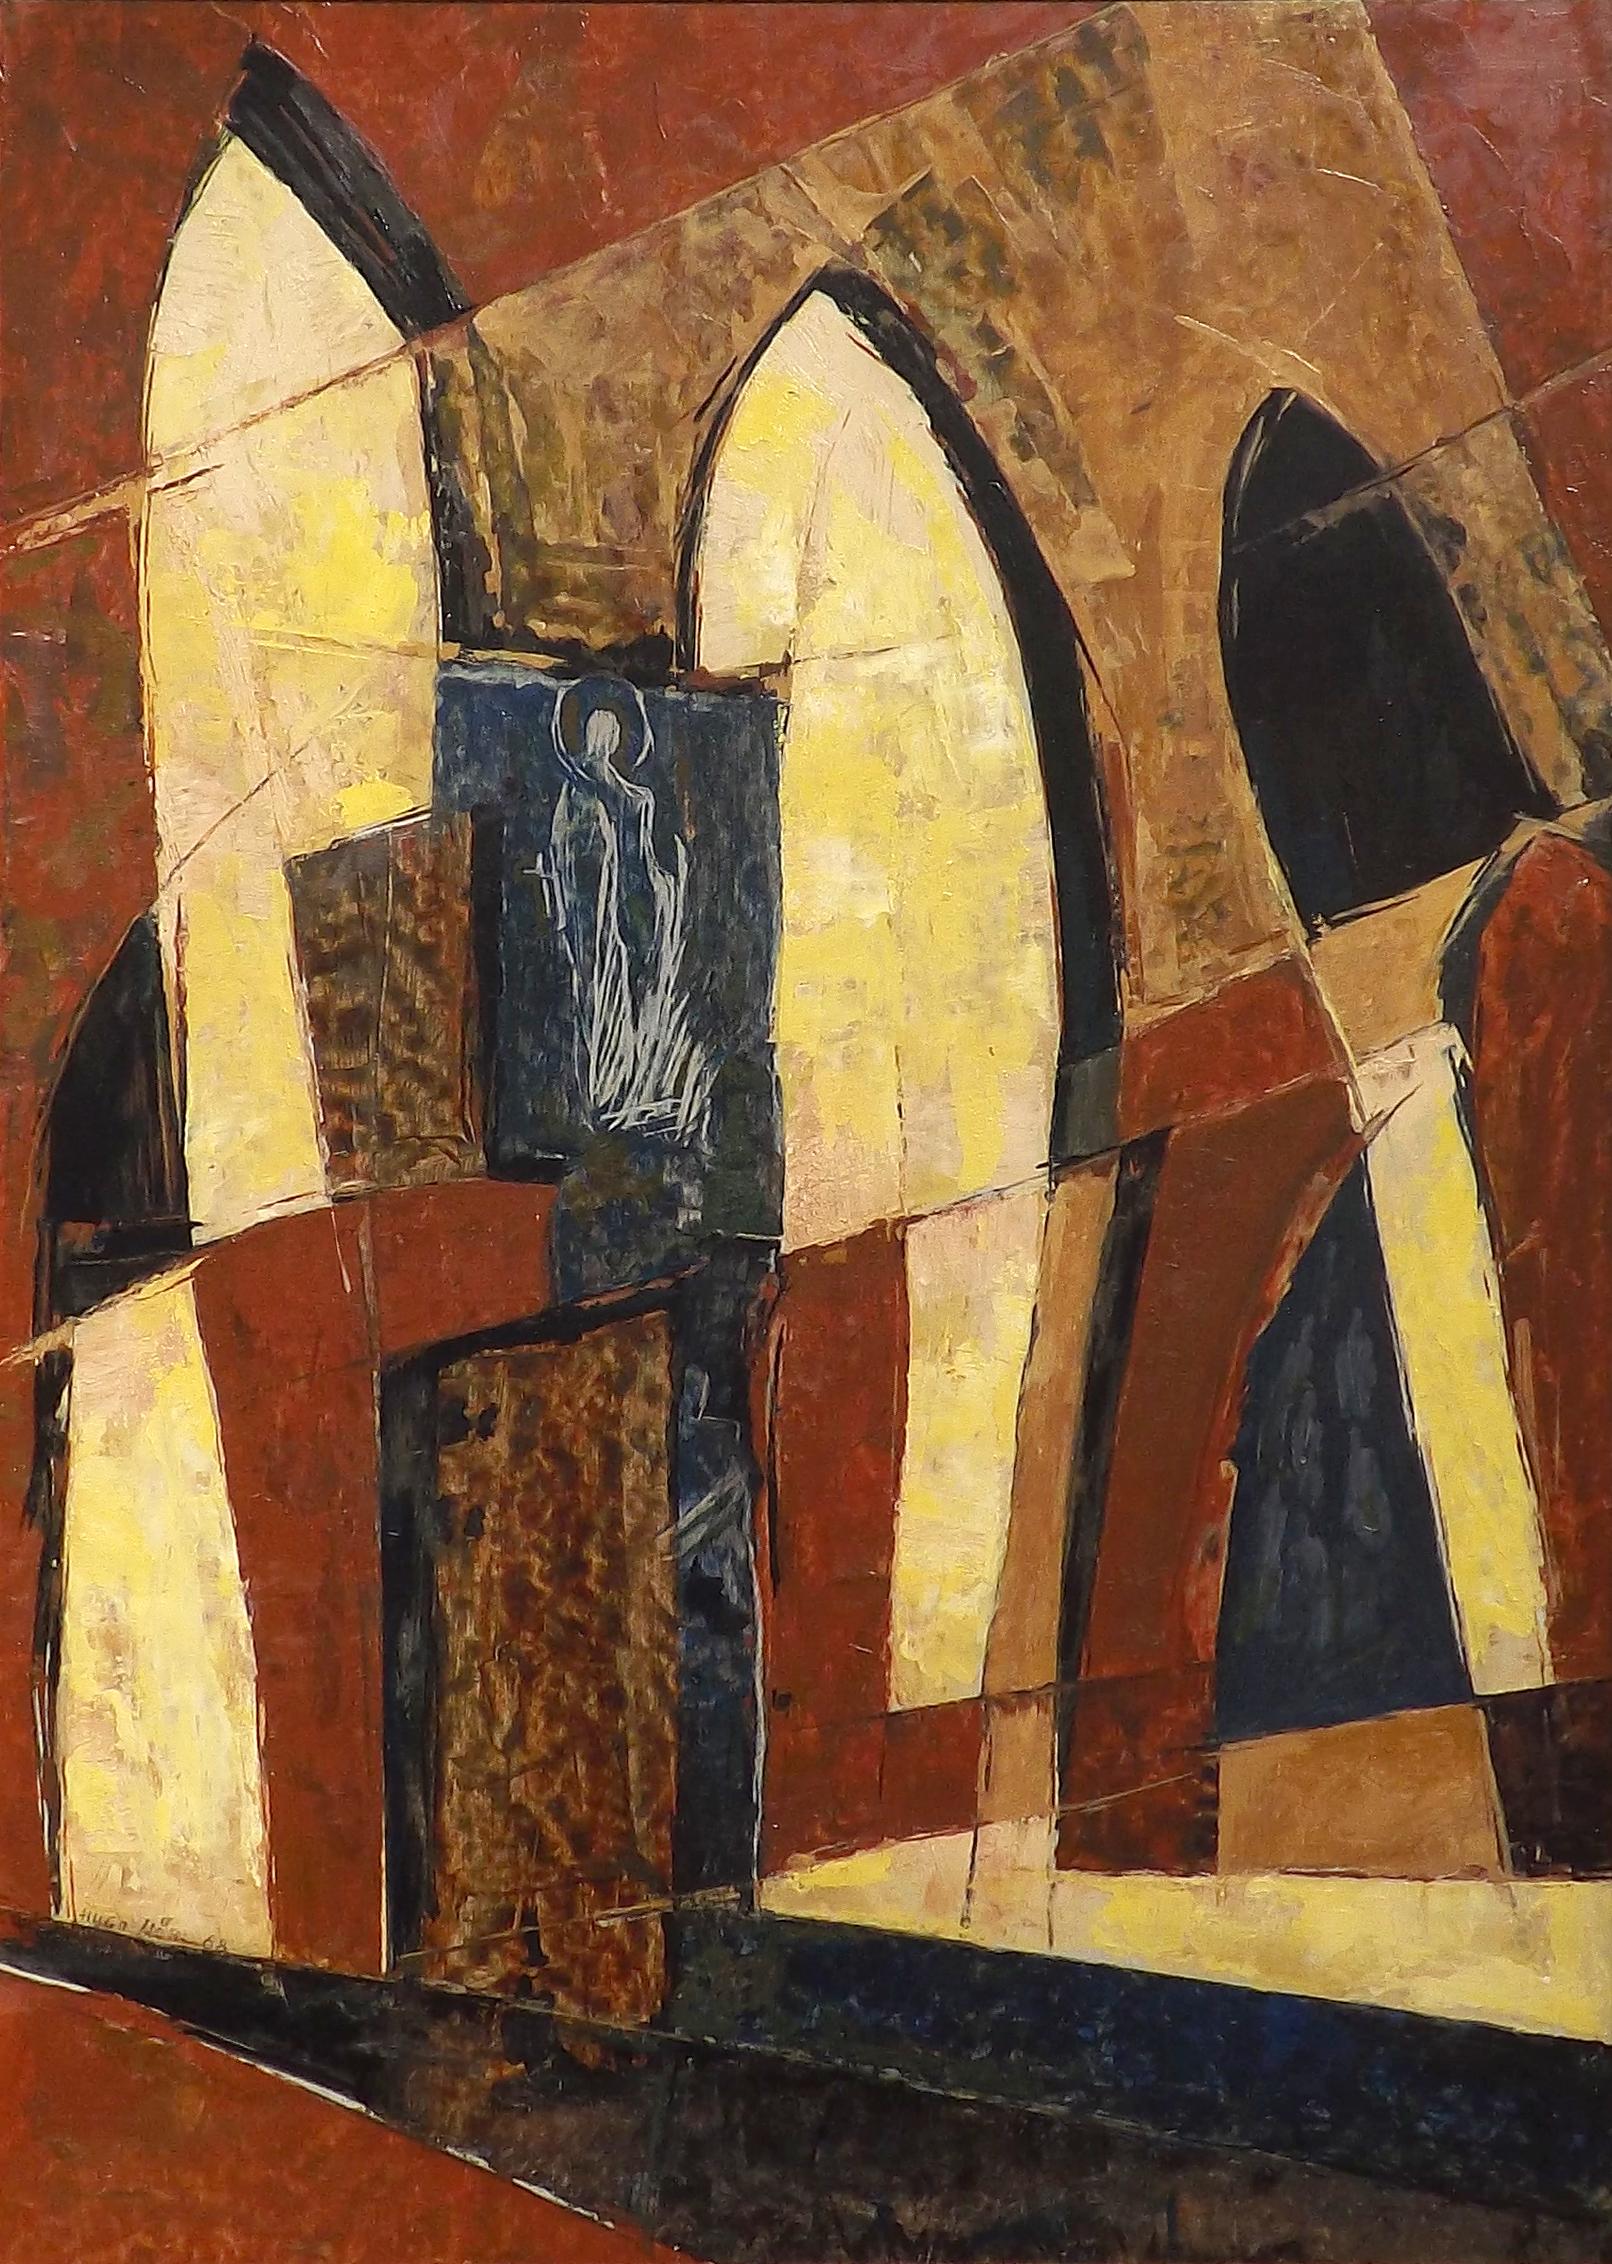 A stunning and colorful abstract view of the interior of a church, envisioned by the German artist Hugo Mohl. High arches reminiscent of stain glass windows surround iconic church statuary. Born in 1893 in Dusseldorf, Germany and graduated from the